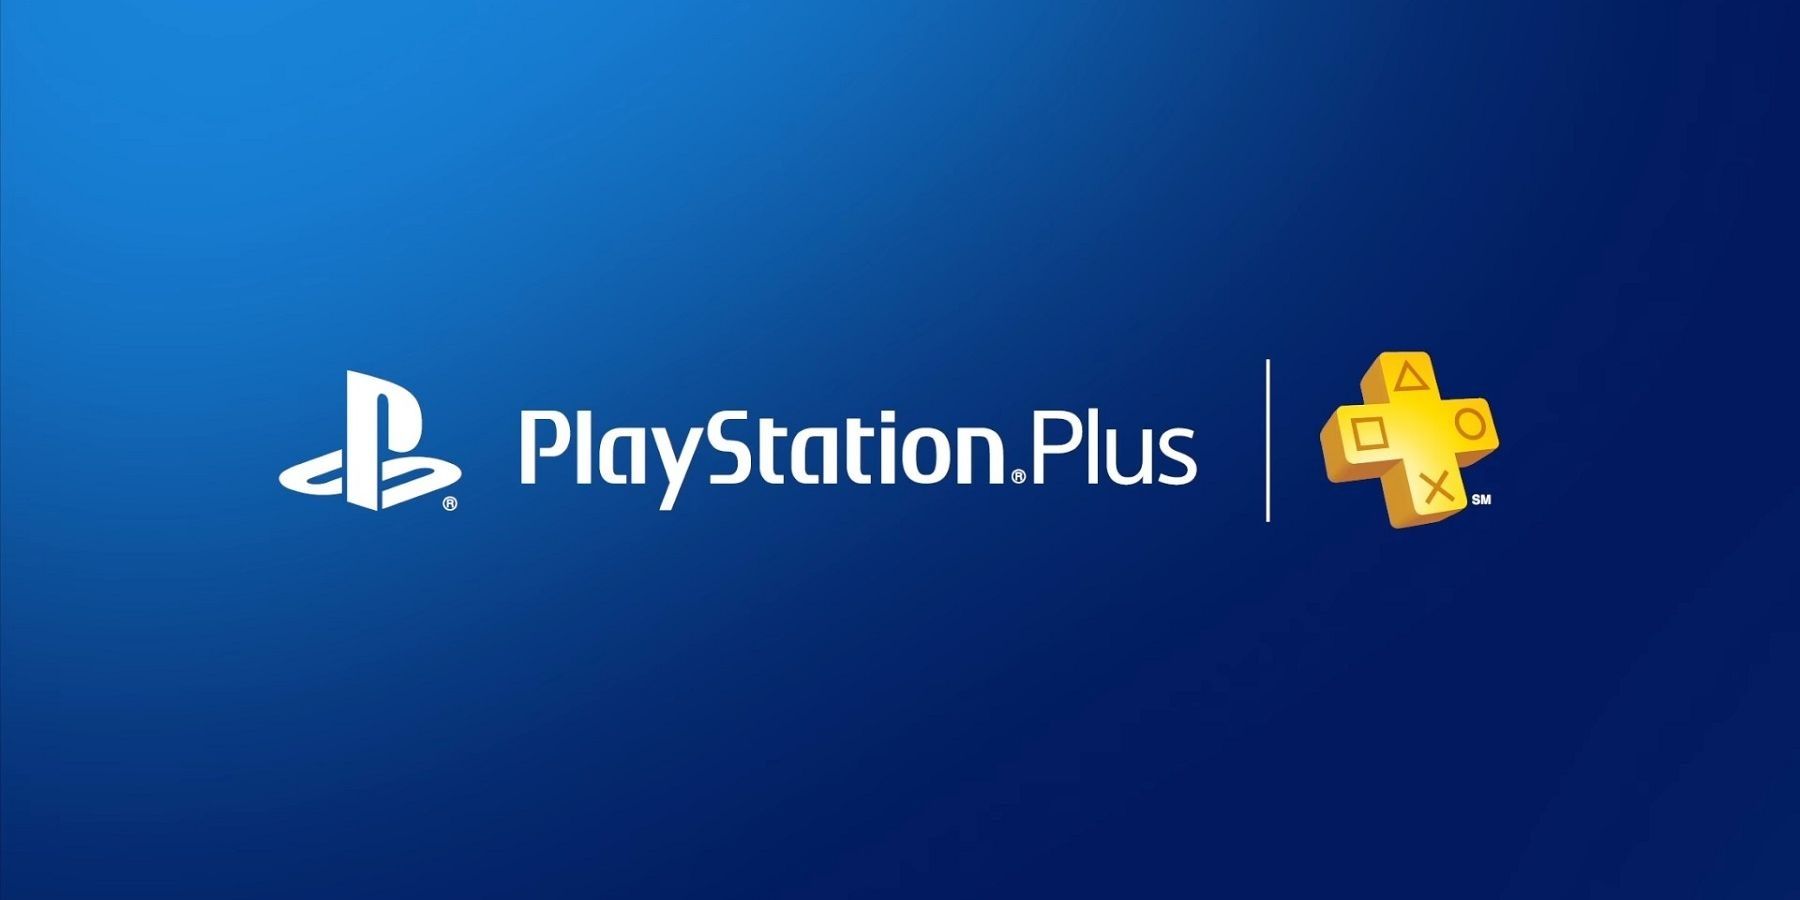 PlayStation Plus: October is getting weird and spooky — Maxi-Geek